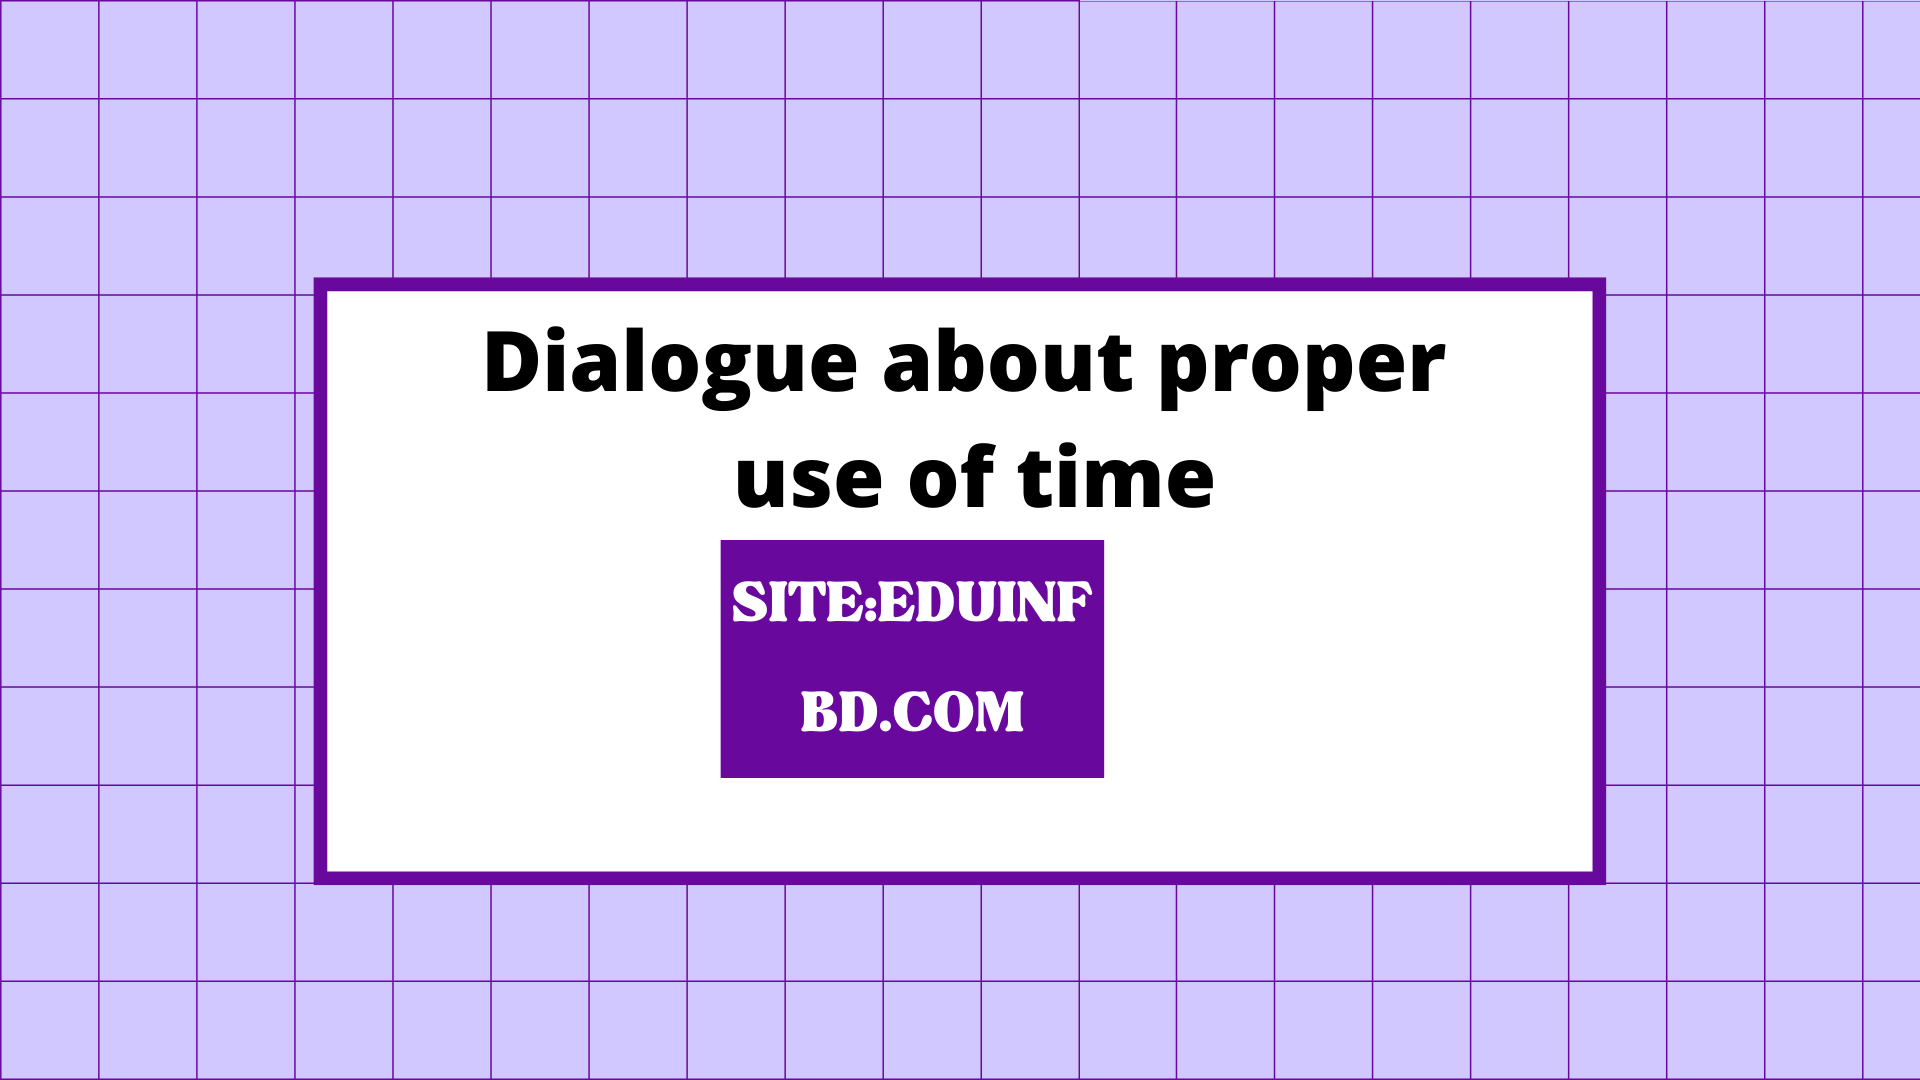 Dialogue about proper use of time